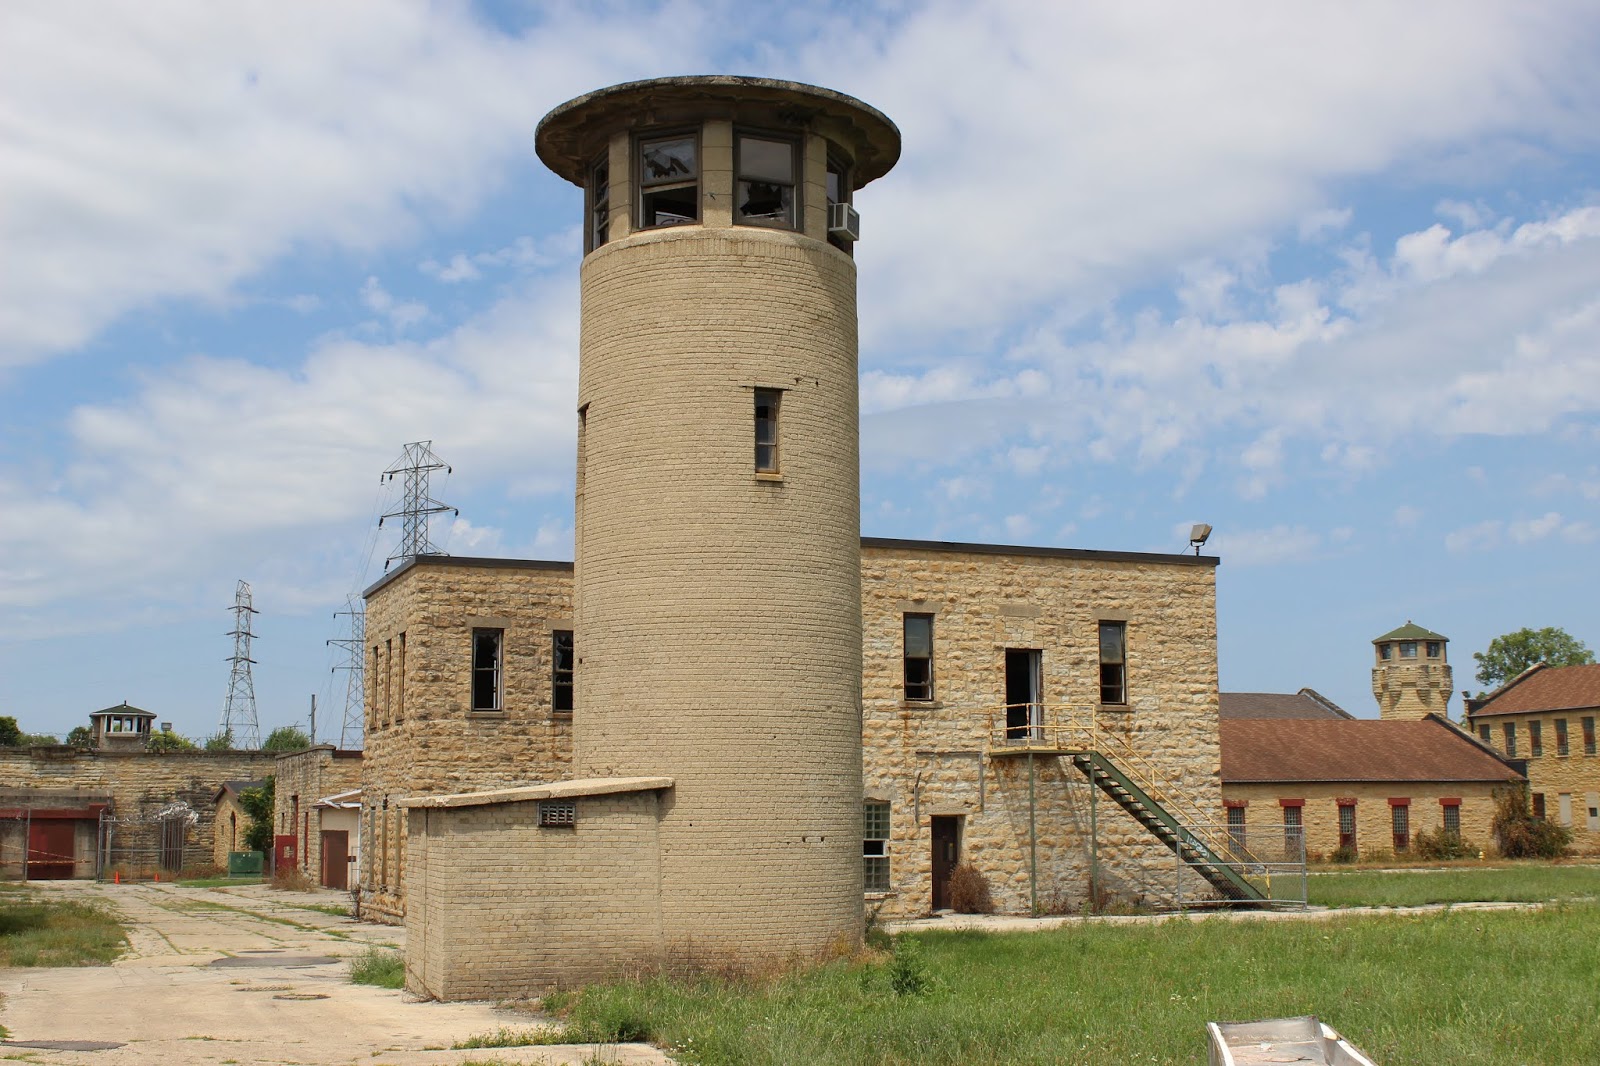 Inside the Big House: The Old Joliet Prison (1858-2002)